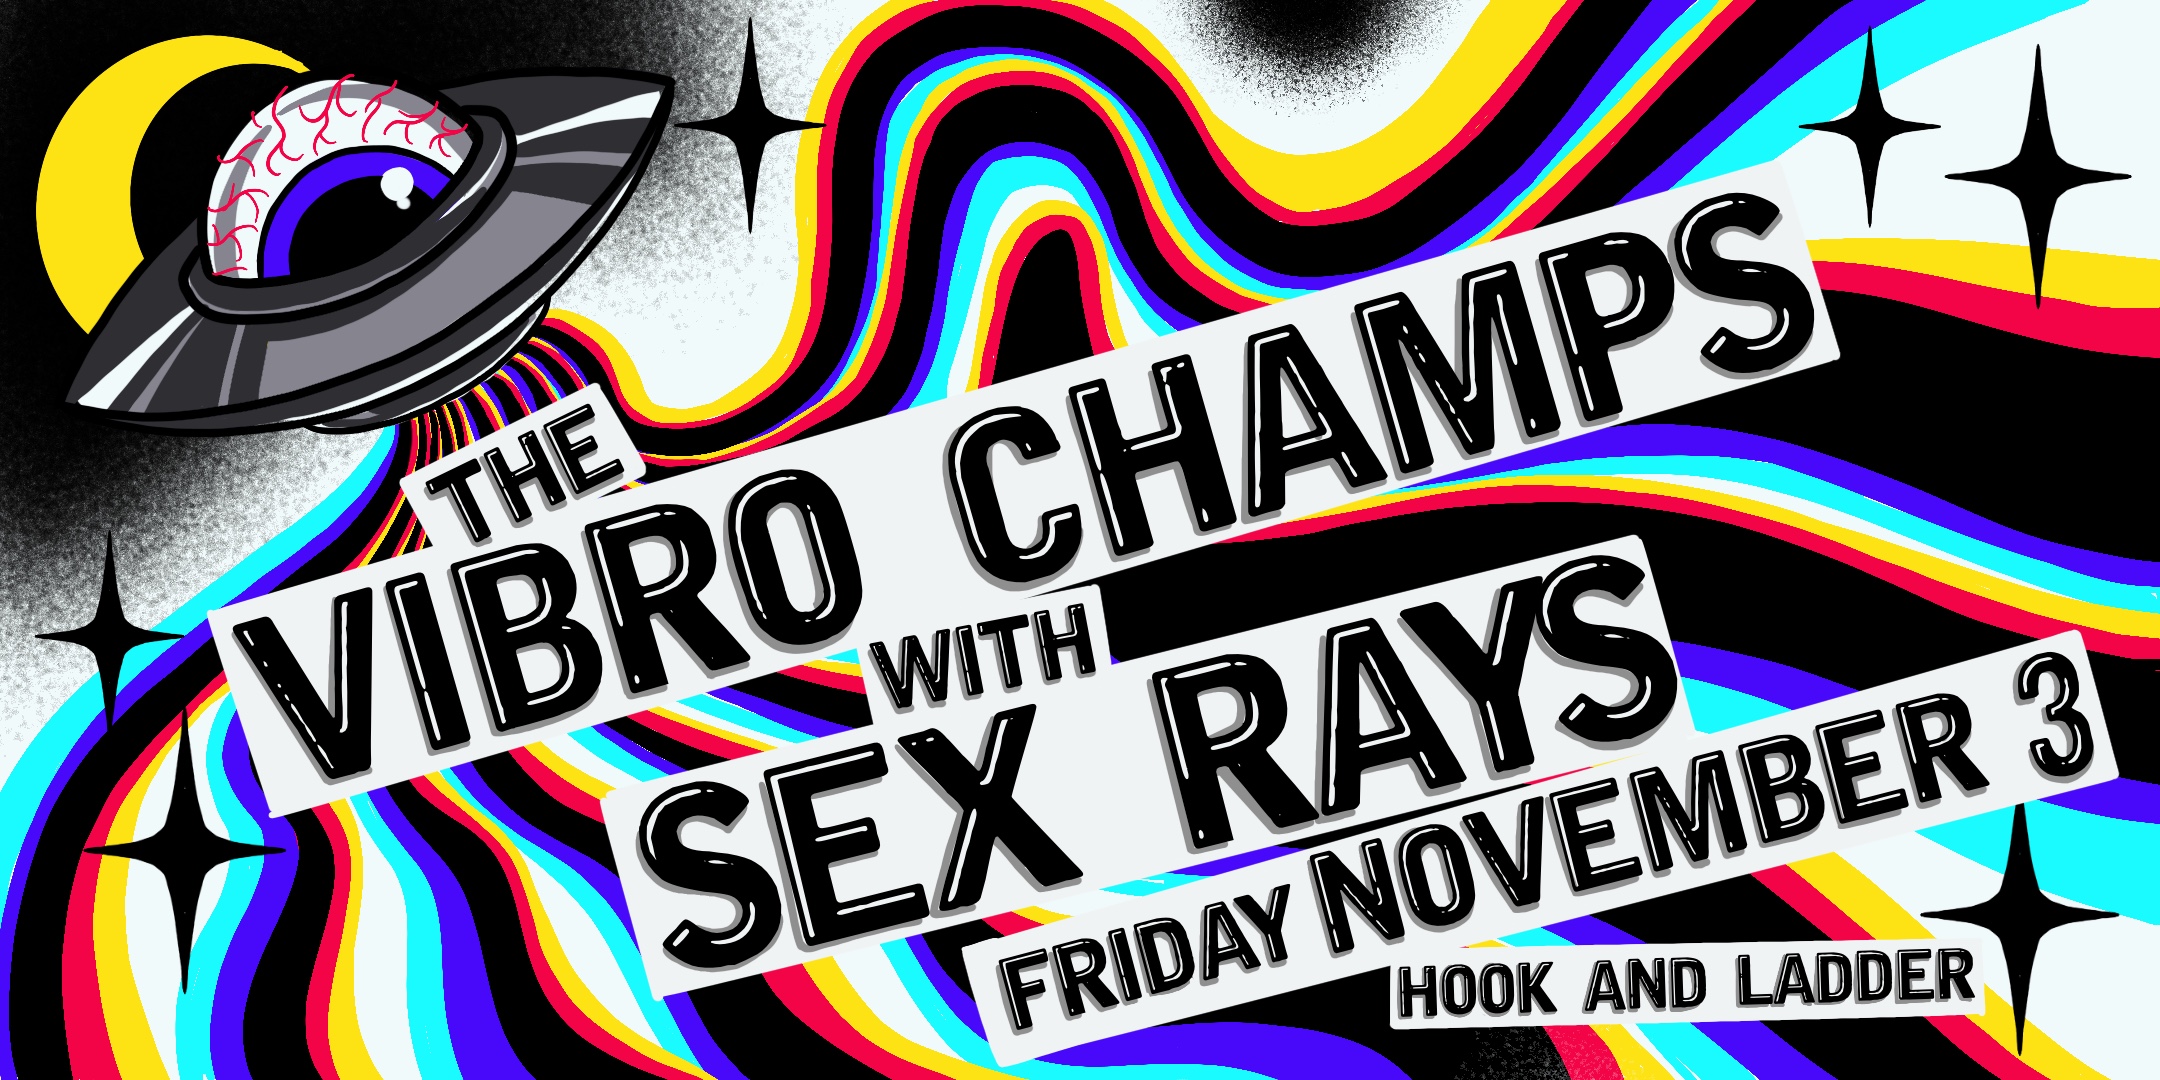 The Vibro Champs w/ special guests Sex Rays Friday, November 3 The Hook and Ladder Theater Doors 8:00pm :: Music 8:30pm :: 21+ General Admission: $10 ADV / $15 DOS